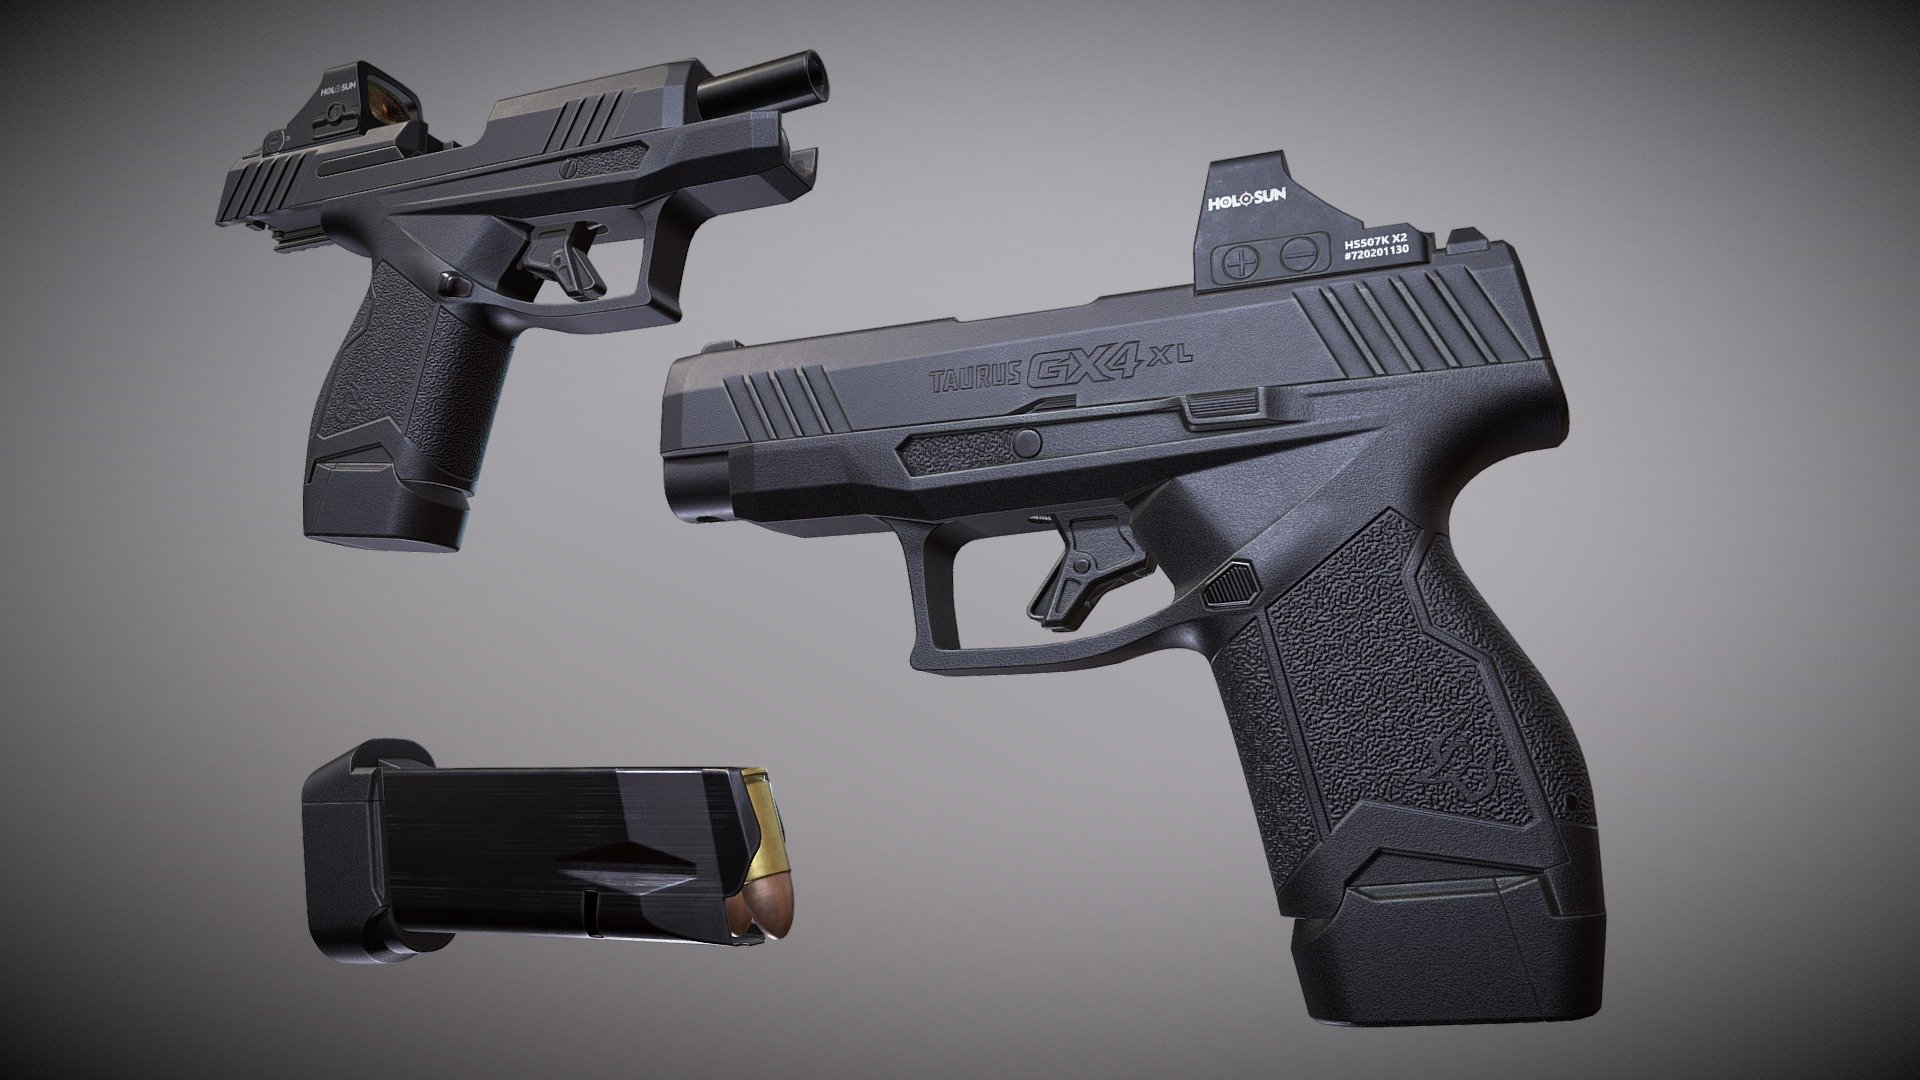 The Taurus GX4 was released in 2021, and is a micro-compact pistol which is the heavy-hitter in the space. The line has seen a few upgrades, and the Taurus GX4XL T.O.R.O. is a version with a longer slide that’s optics-ready. The Holosun HS507K X2 is an open red dot sight designed for concealed carry pistols.

Low-poly pbr-game-ready model - Taurus Gx4 XL with holosun hs507k x2 - Buy Royalty Free 3D model by Wallerion 3d model